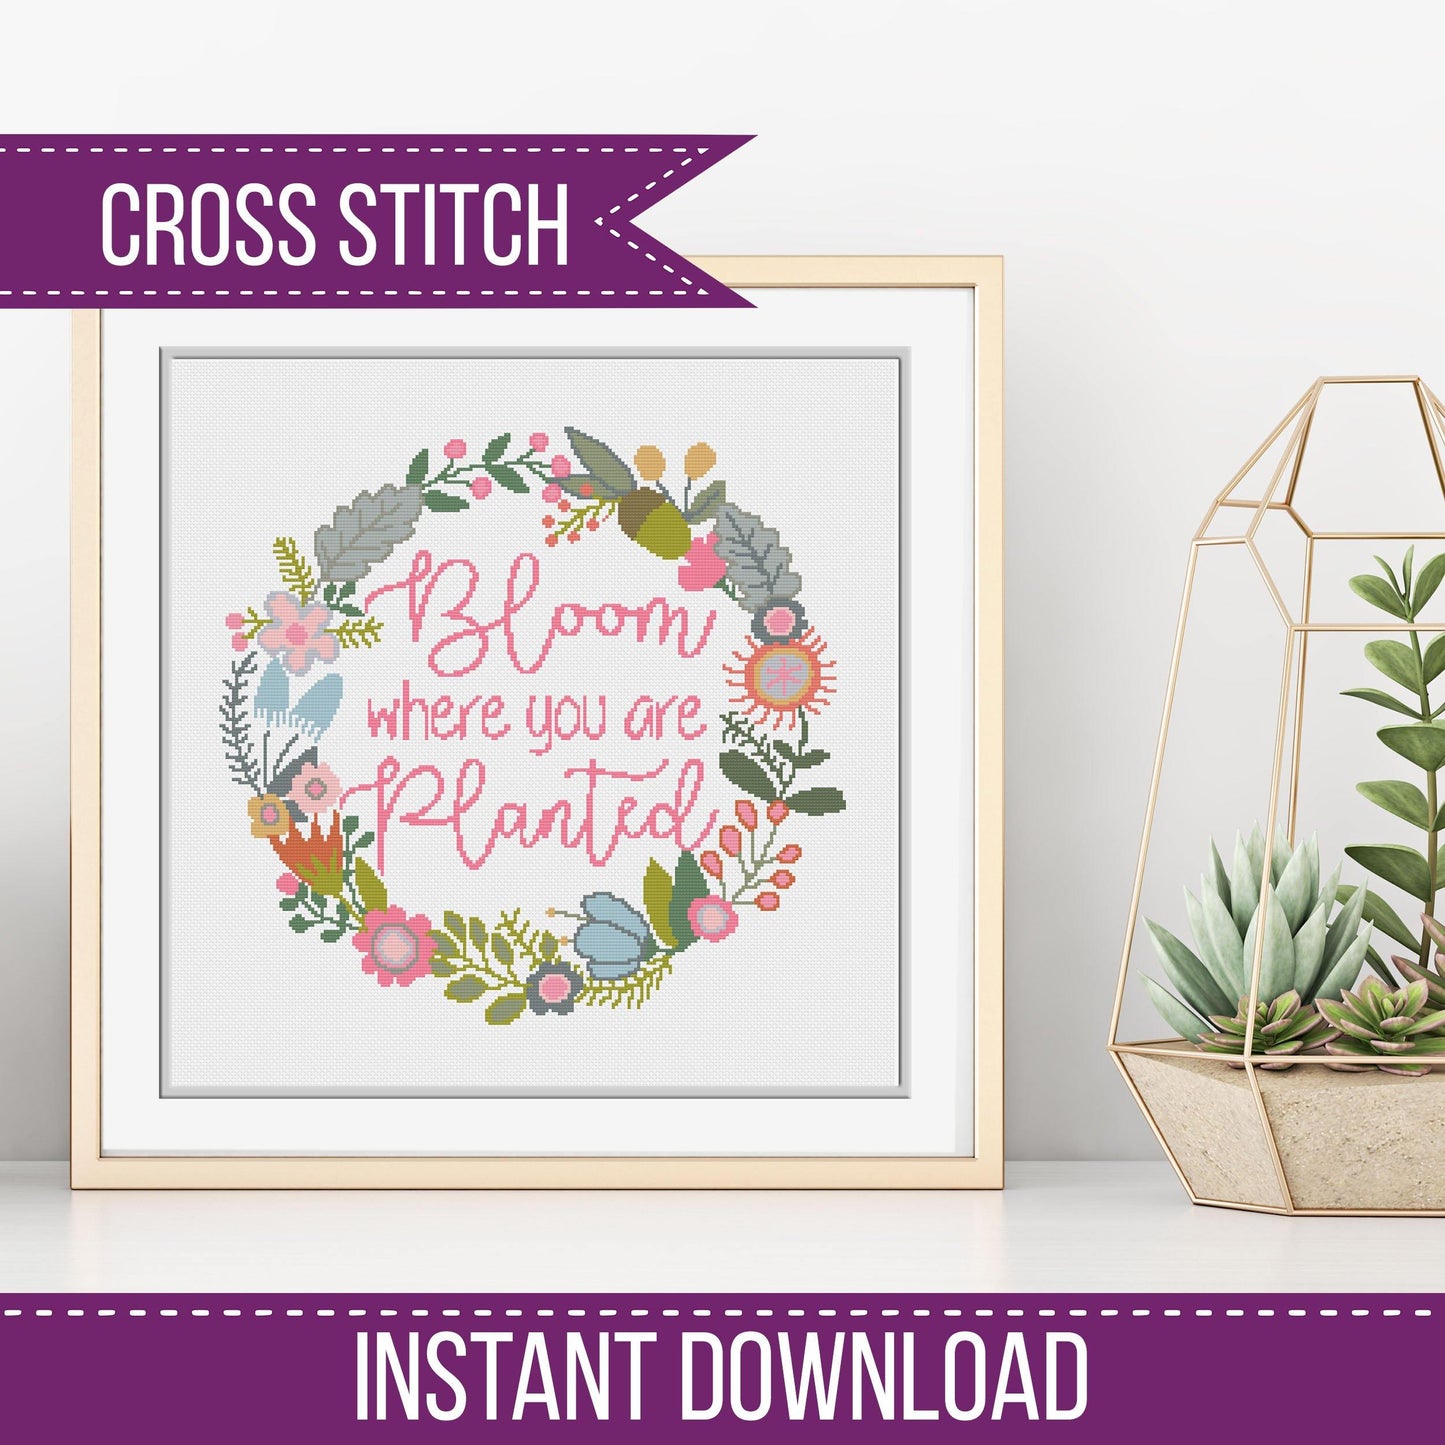 Bloom where you are planted - Blackwork Patterns & Cross Stitch by Peppermint Purple